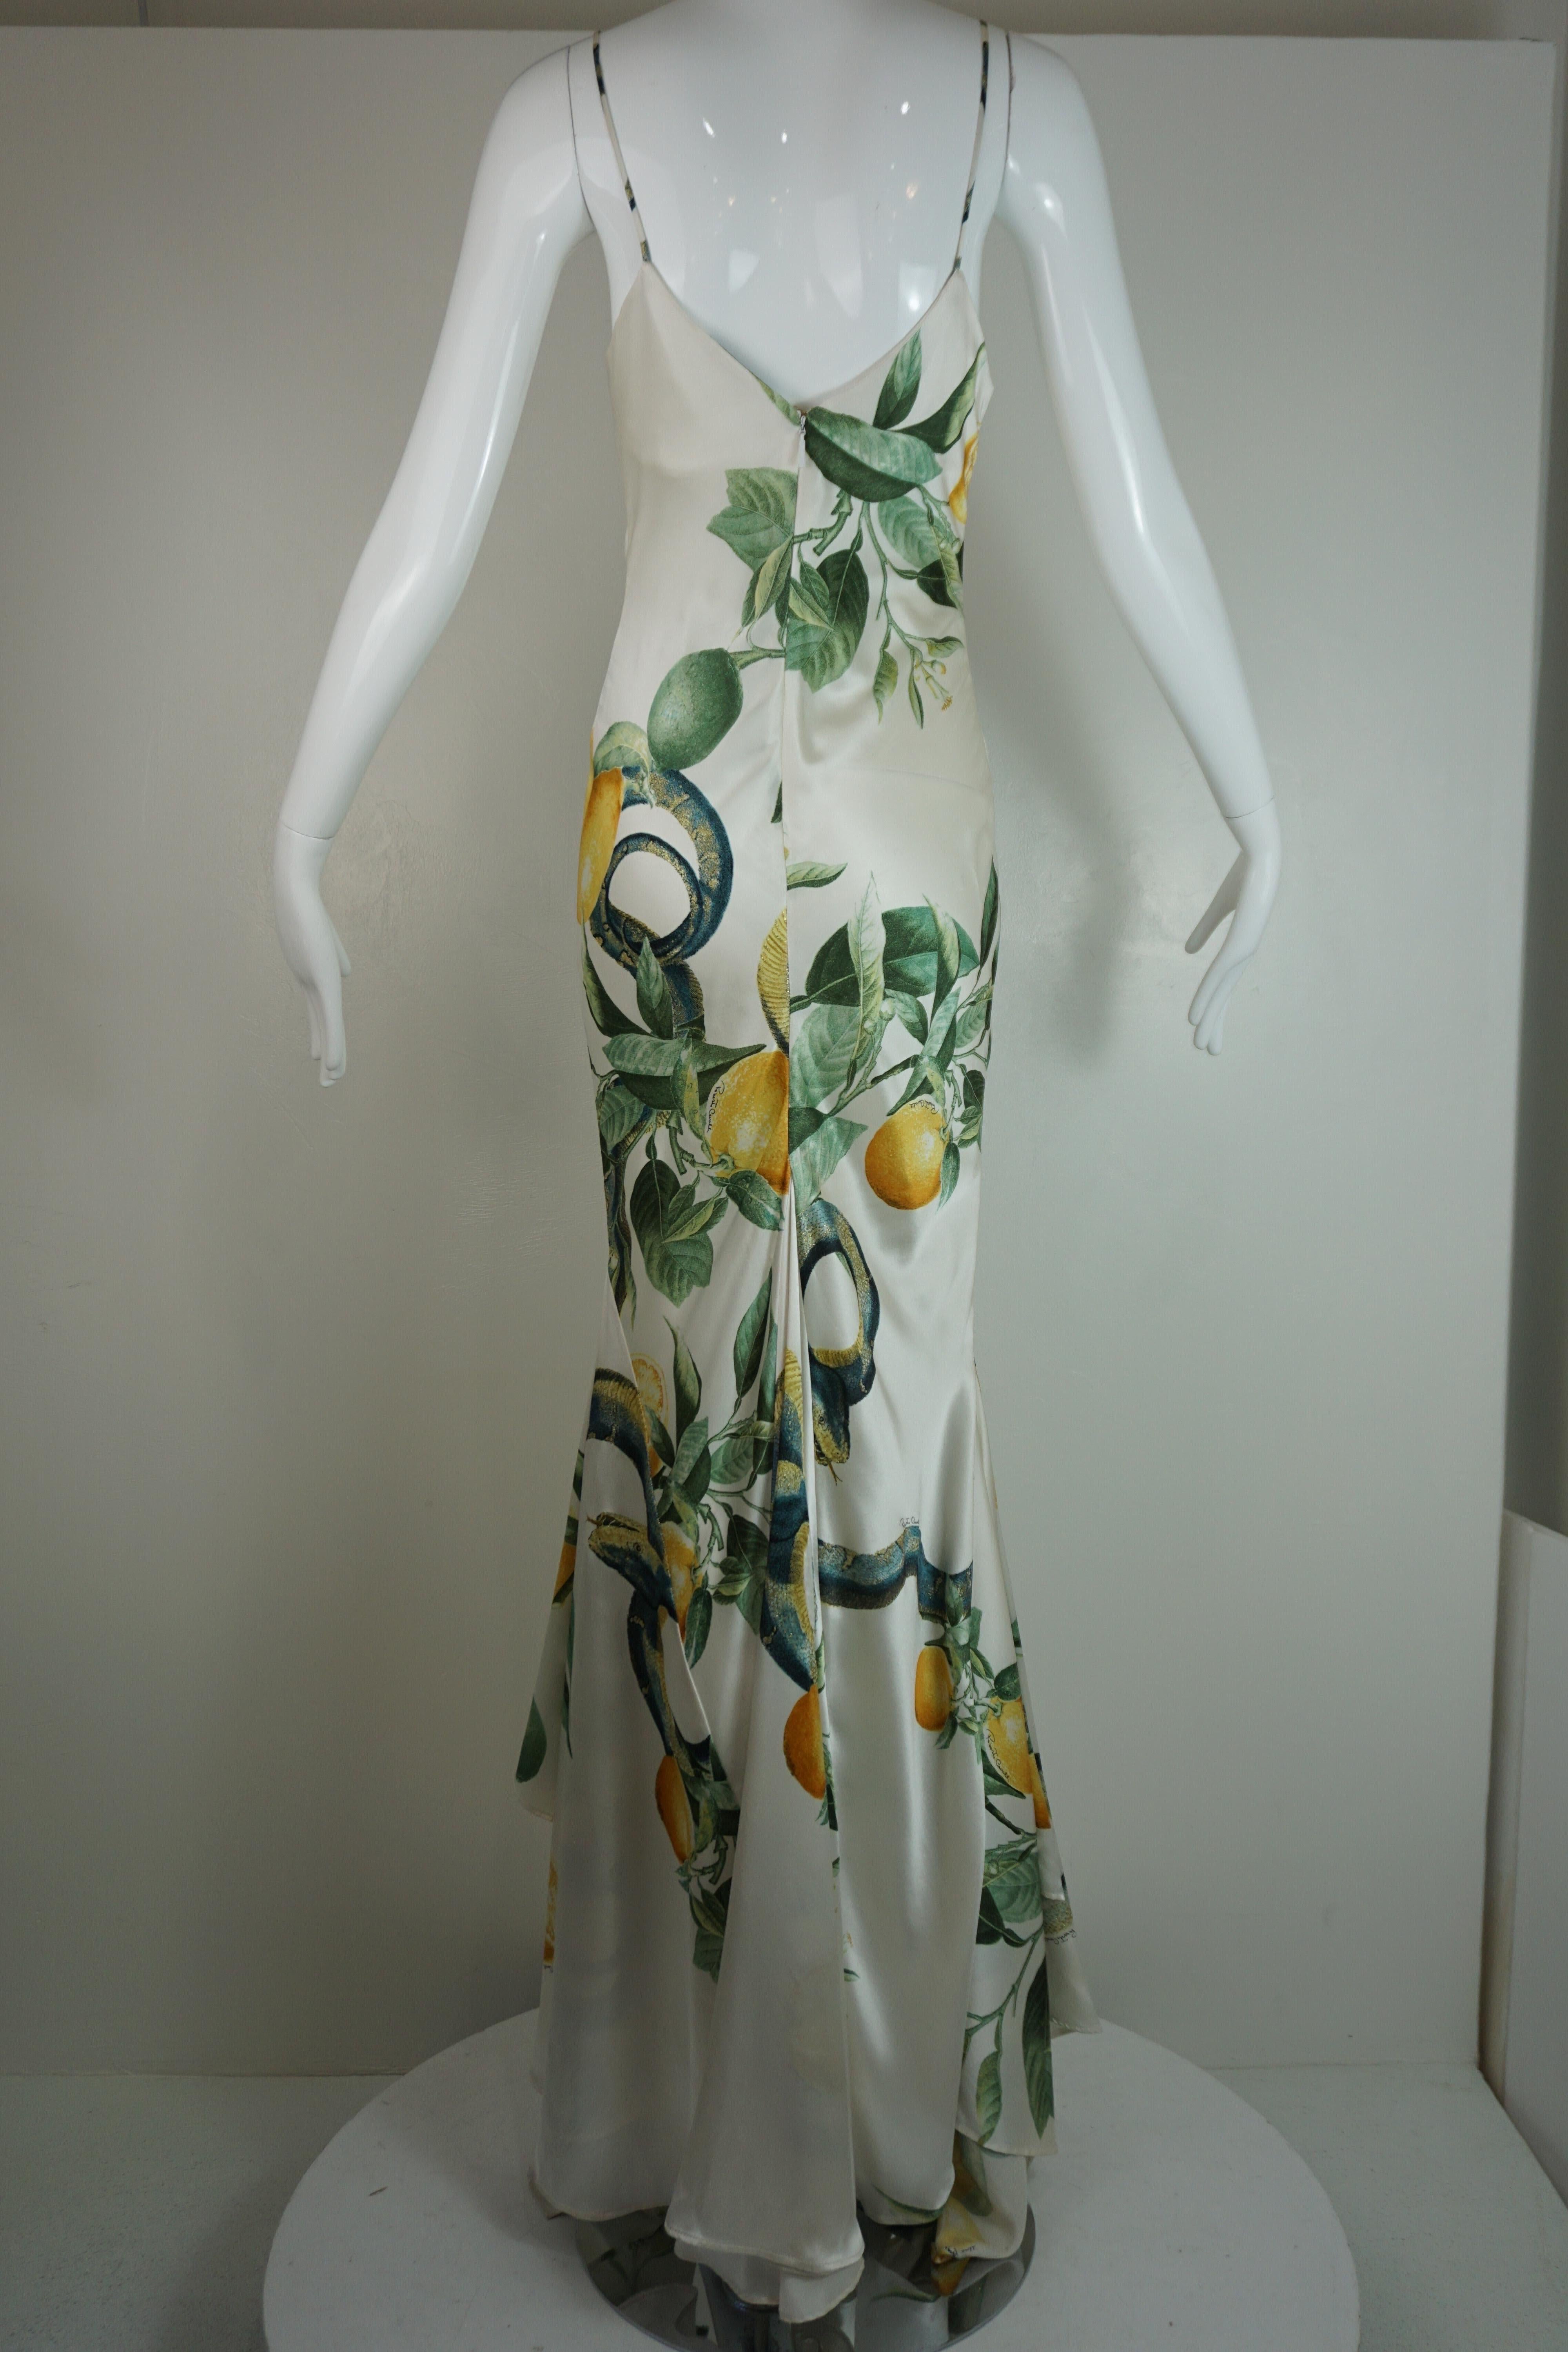 Roberto Cavalli Spring 2005 Slip Dress Gown In Excellent Condition For Sale In Carmel, CA